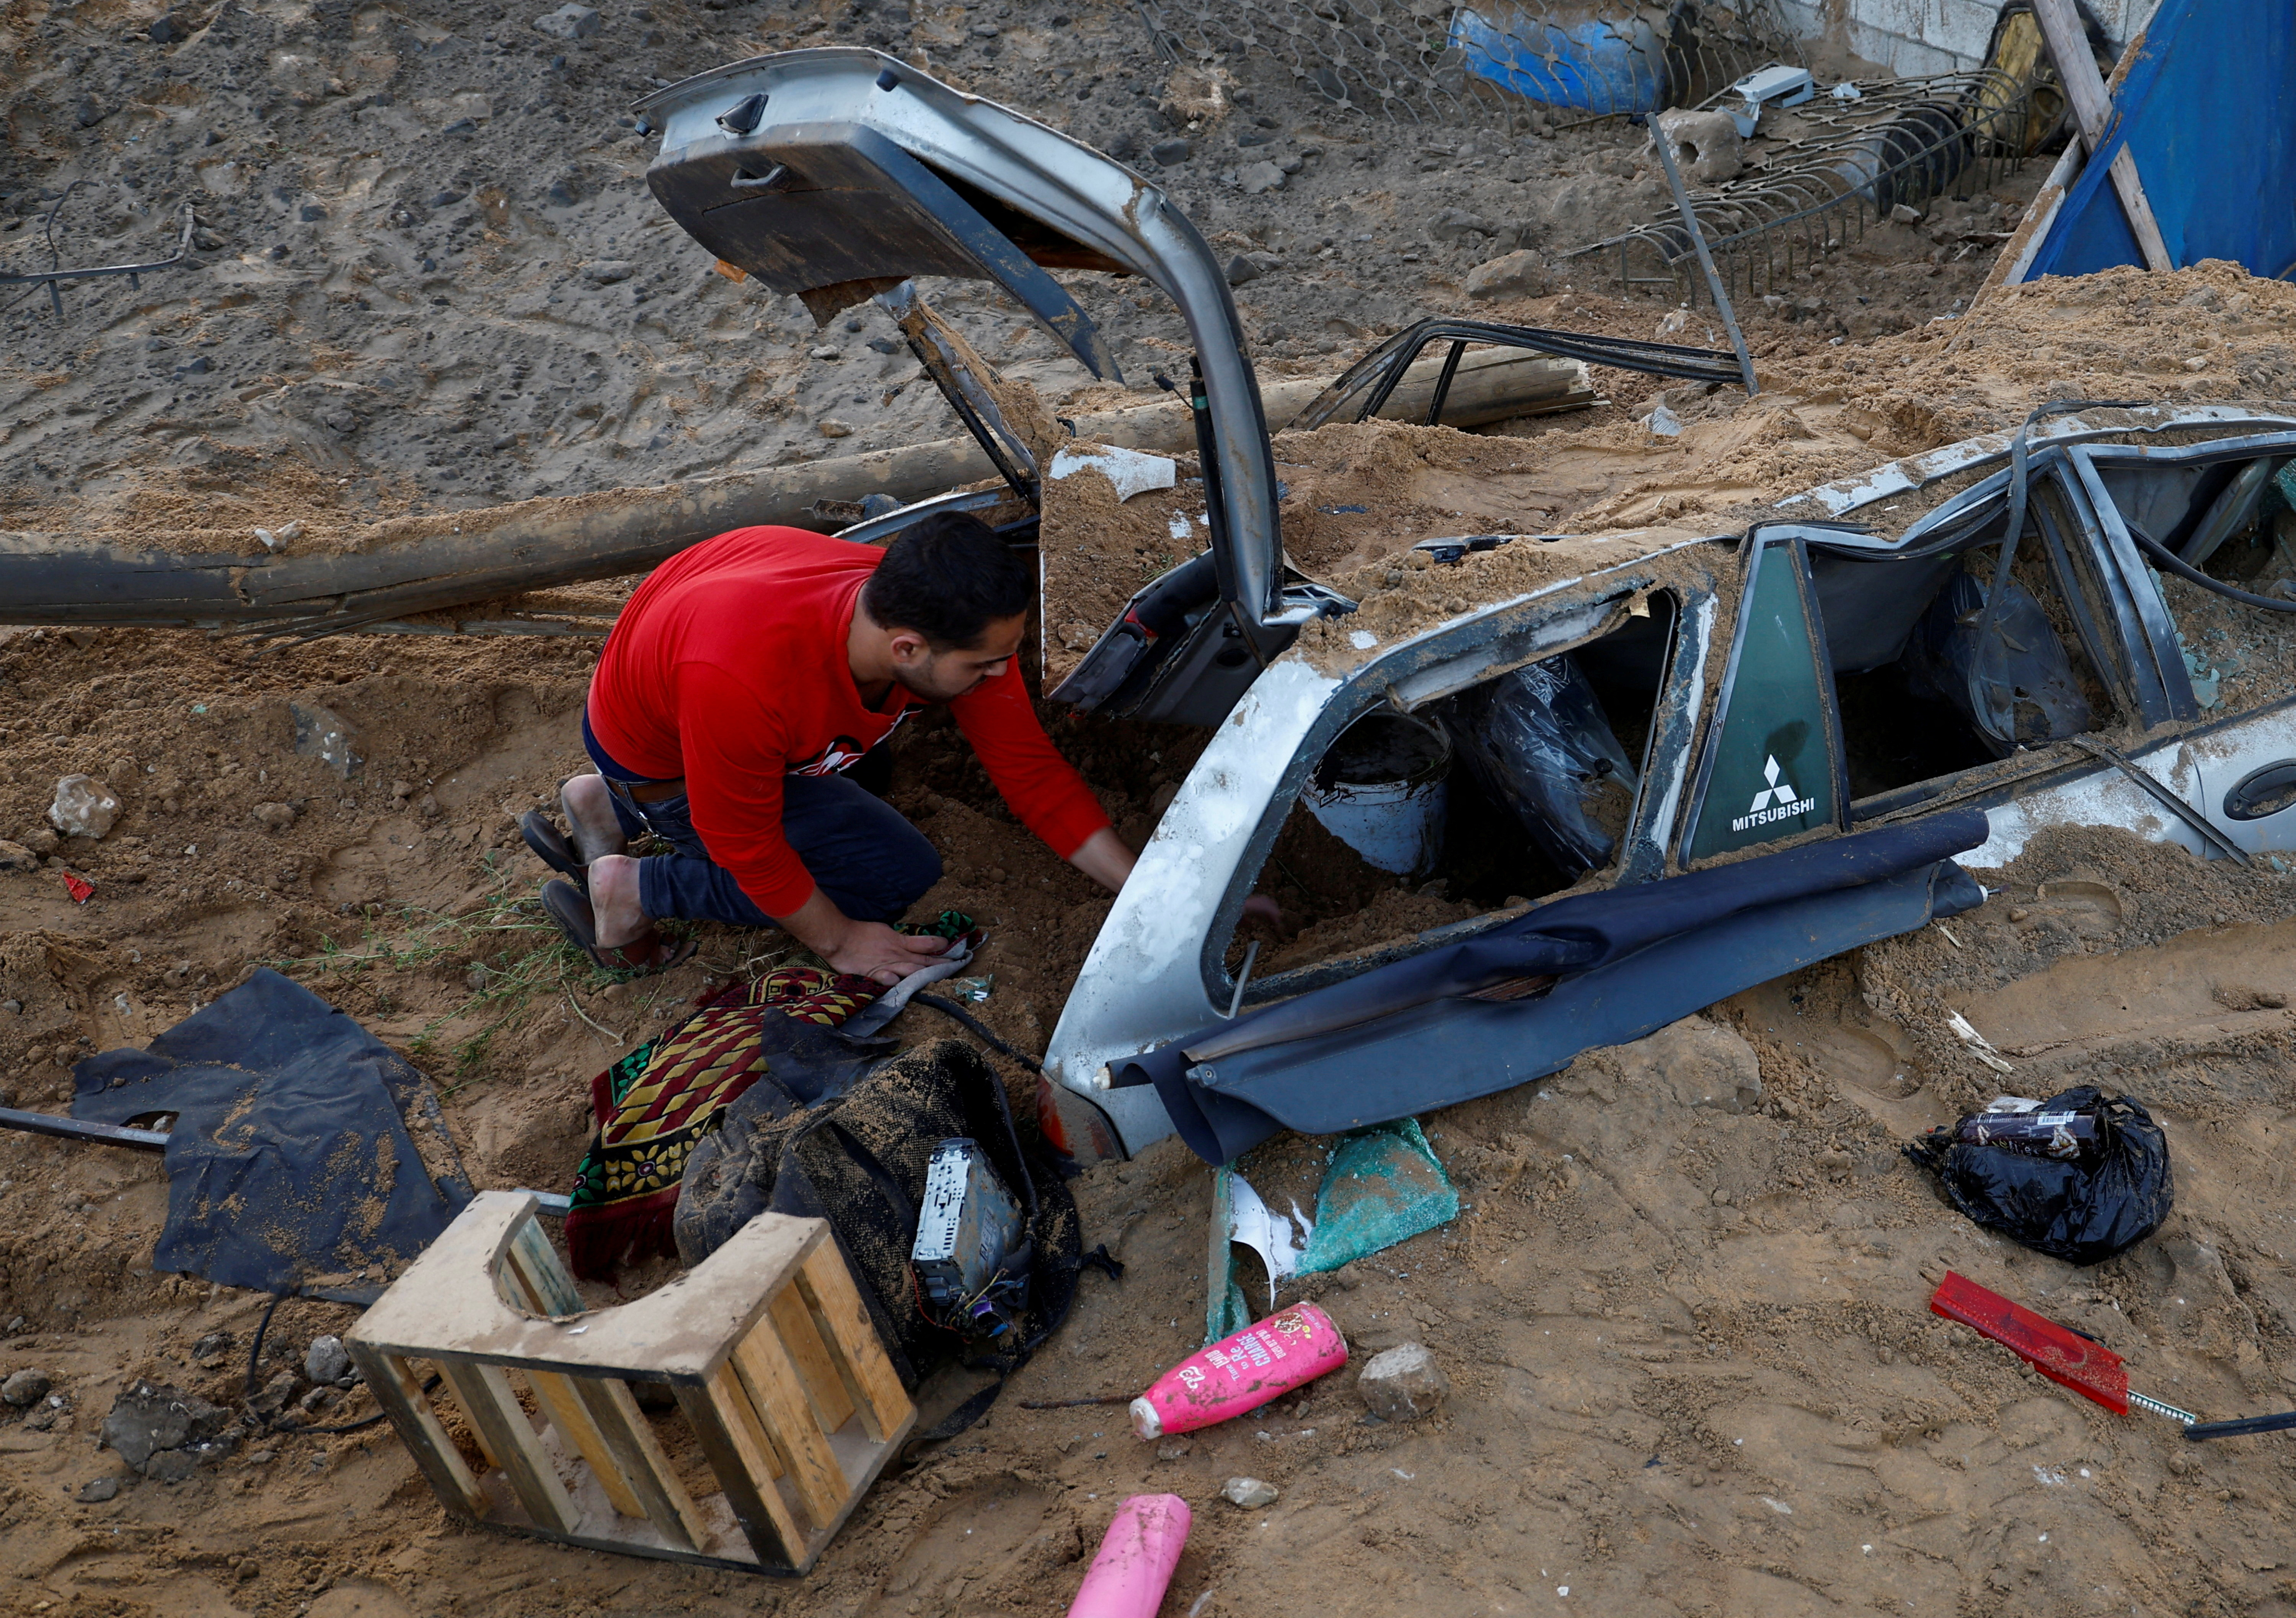 A Palestinian man Muhanad Abu Neama checks the damage of his car, in the aftermath of Israeli airstrikes in Gaza City